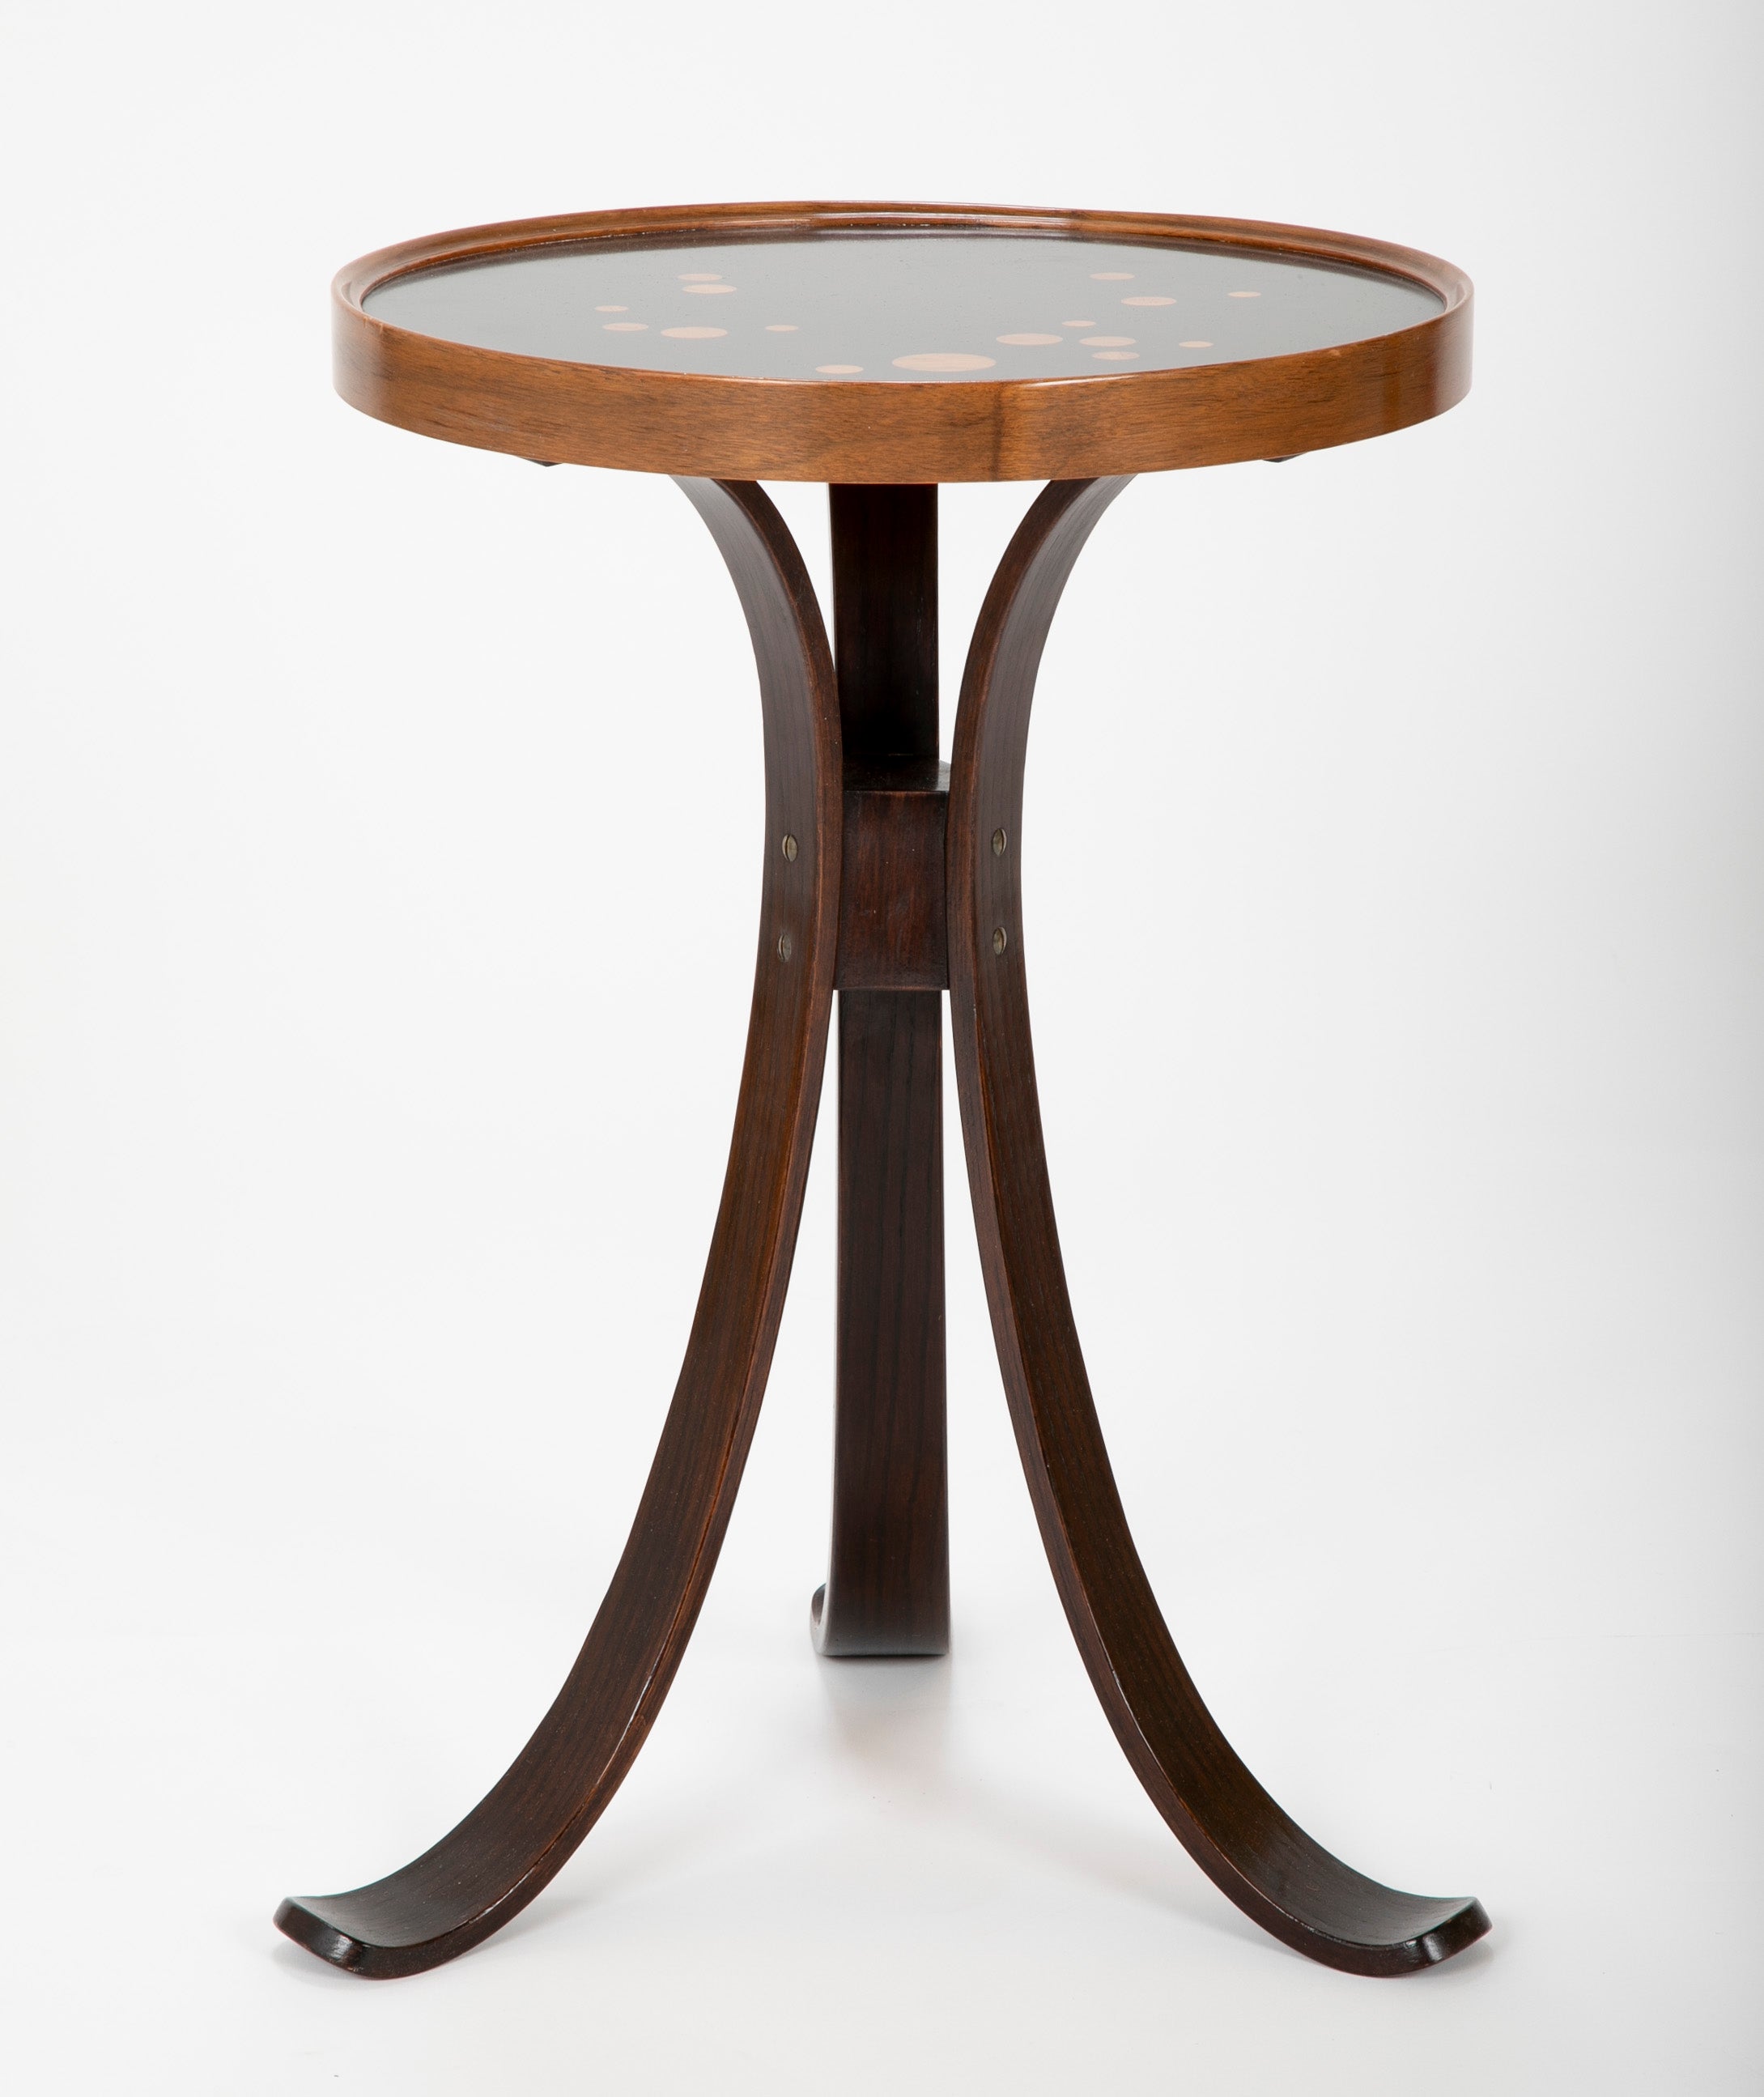 Pair of "Constellation Tables" by Edward Wormley for Dunbar  -  Priced Individually